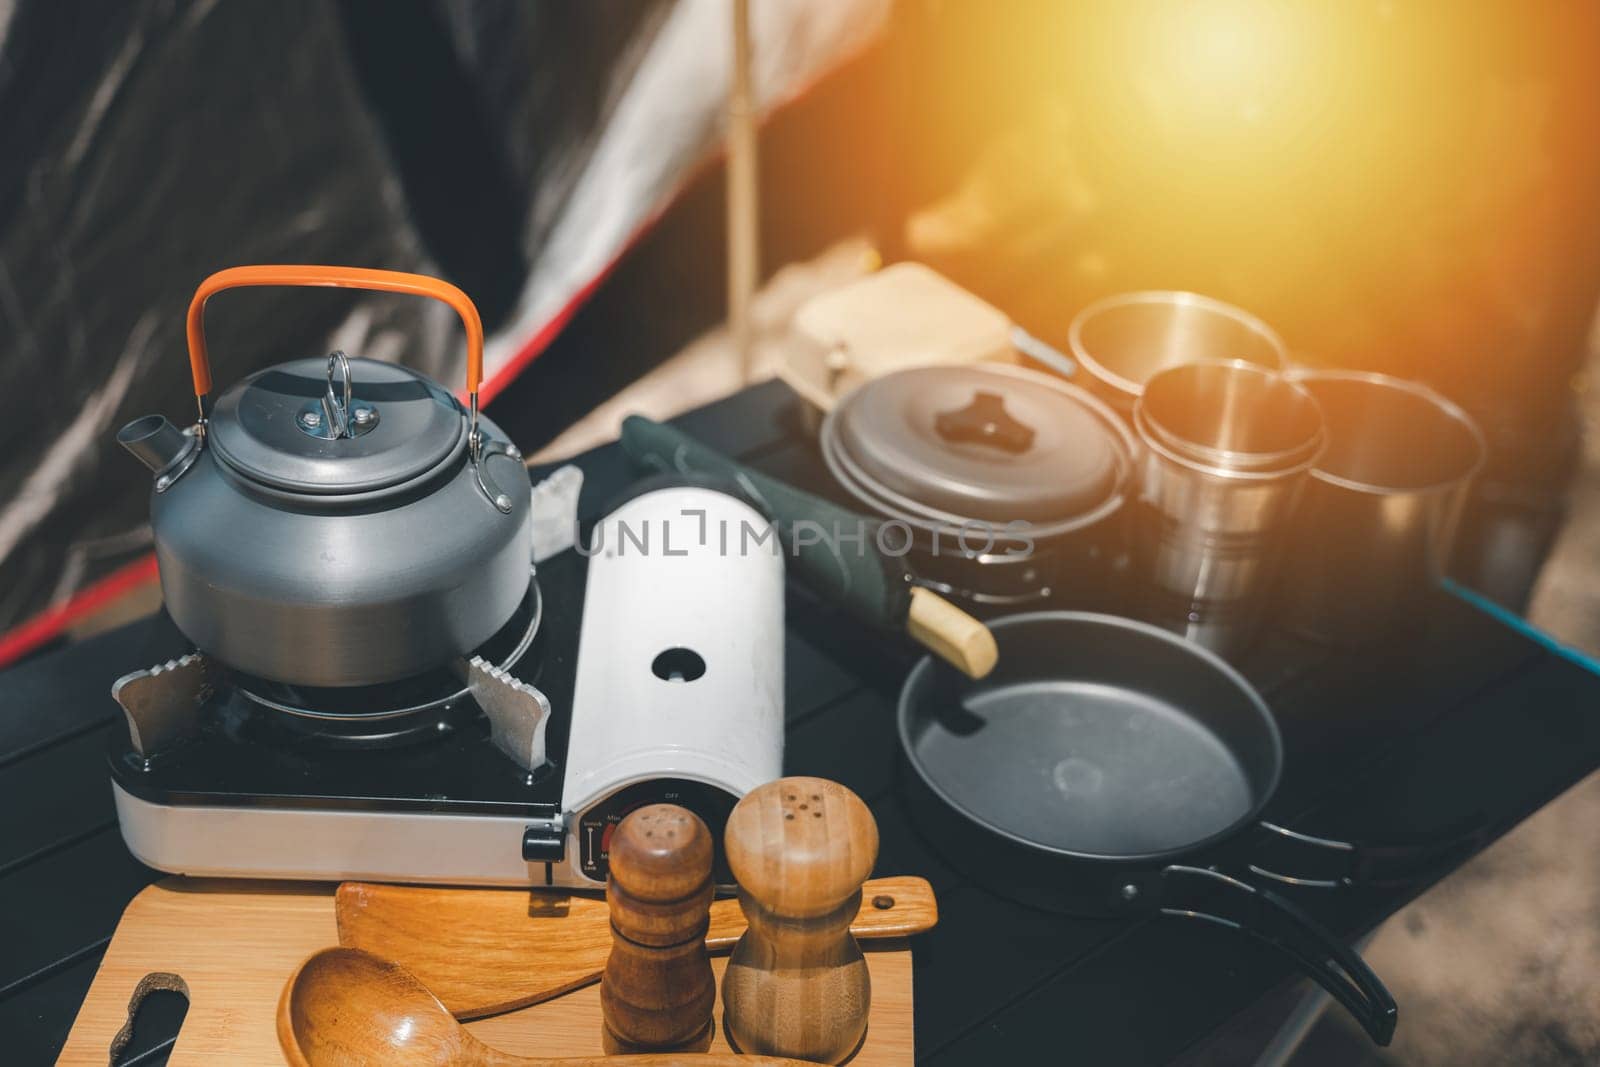 Enhance your camping adventure, kettle, pot, pan, gas stove, flashlight, and camera neatly set on a table by the tent. The perfect outdoor setup for a memorable journey. by Sorapop